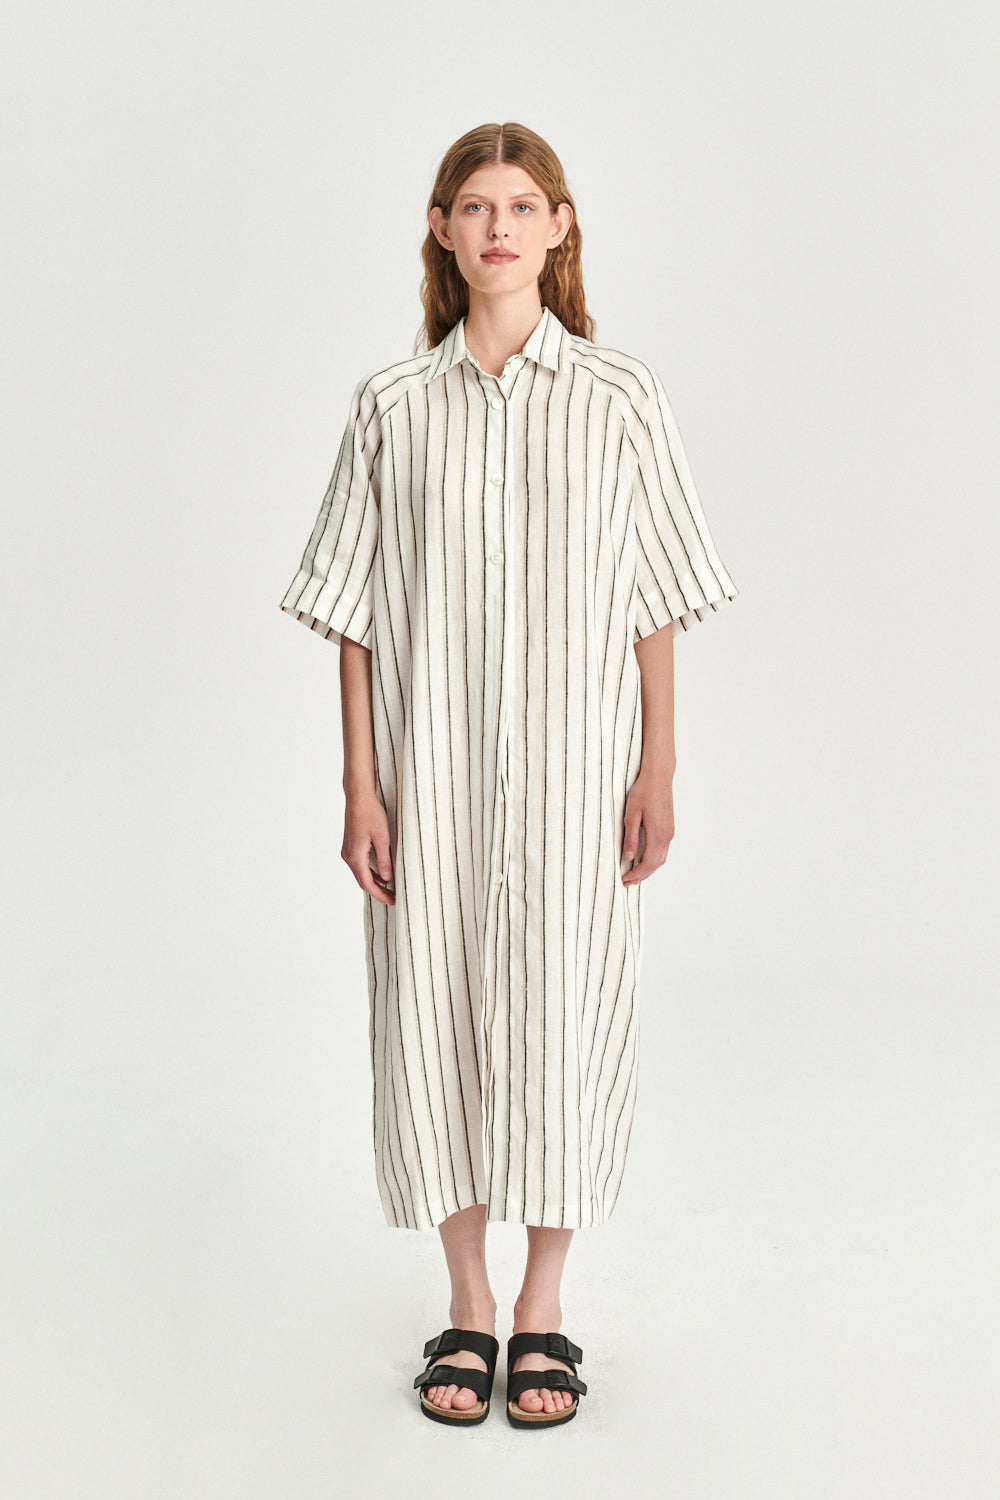 Dress in a  in a Fine White Black and Beige Airy Double Striped Bohemian Linen